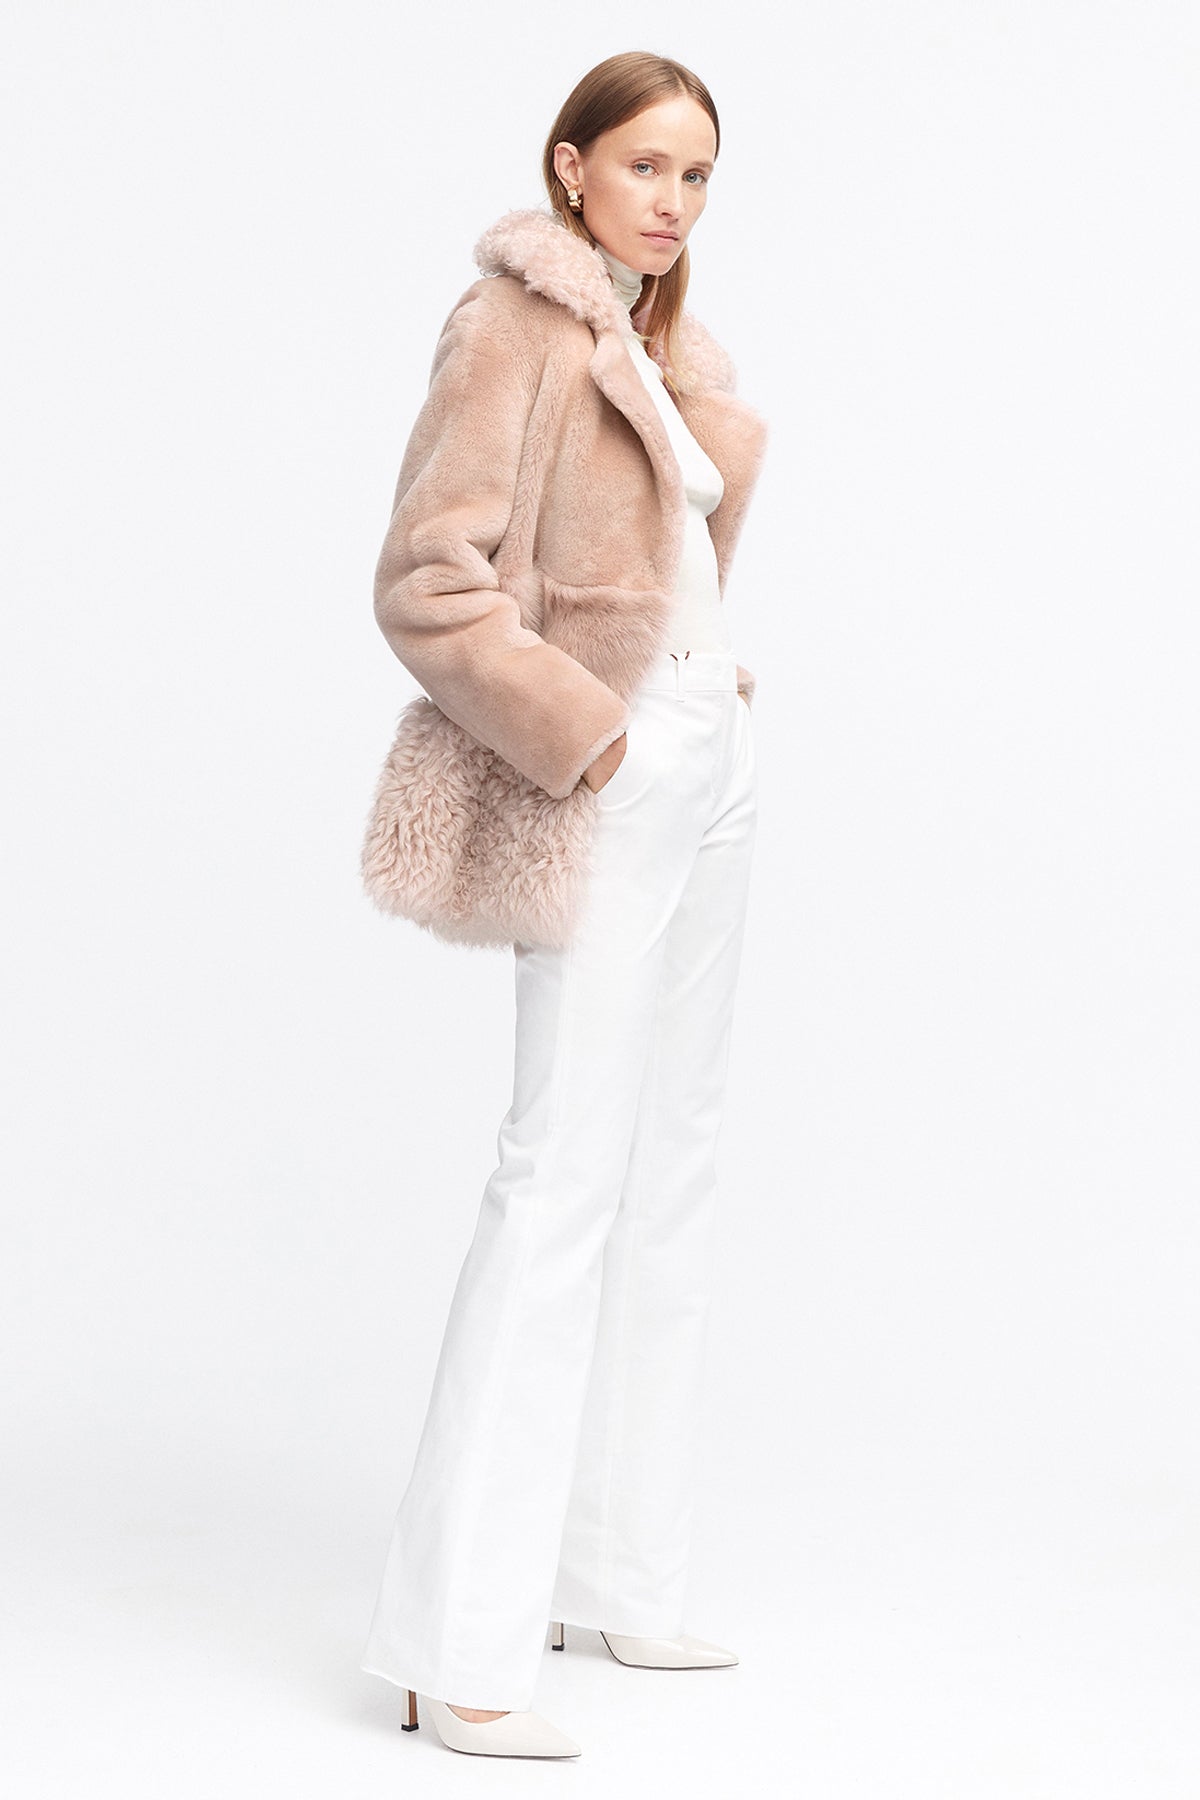 Model is wearing the Anouk Nude Luxurious Shearling Coat Side